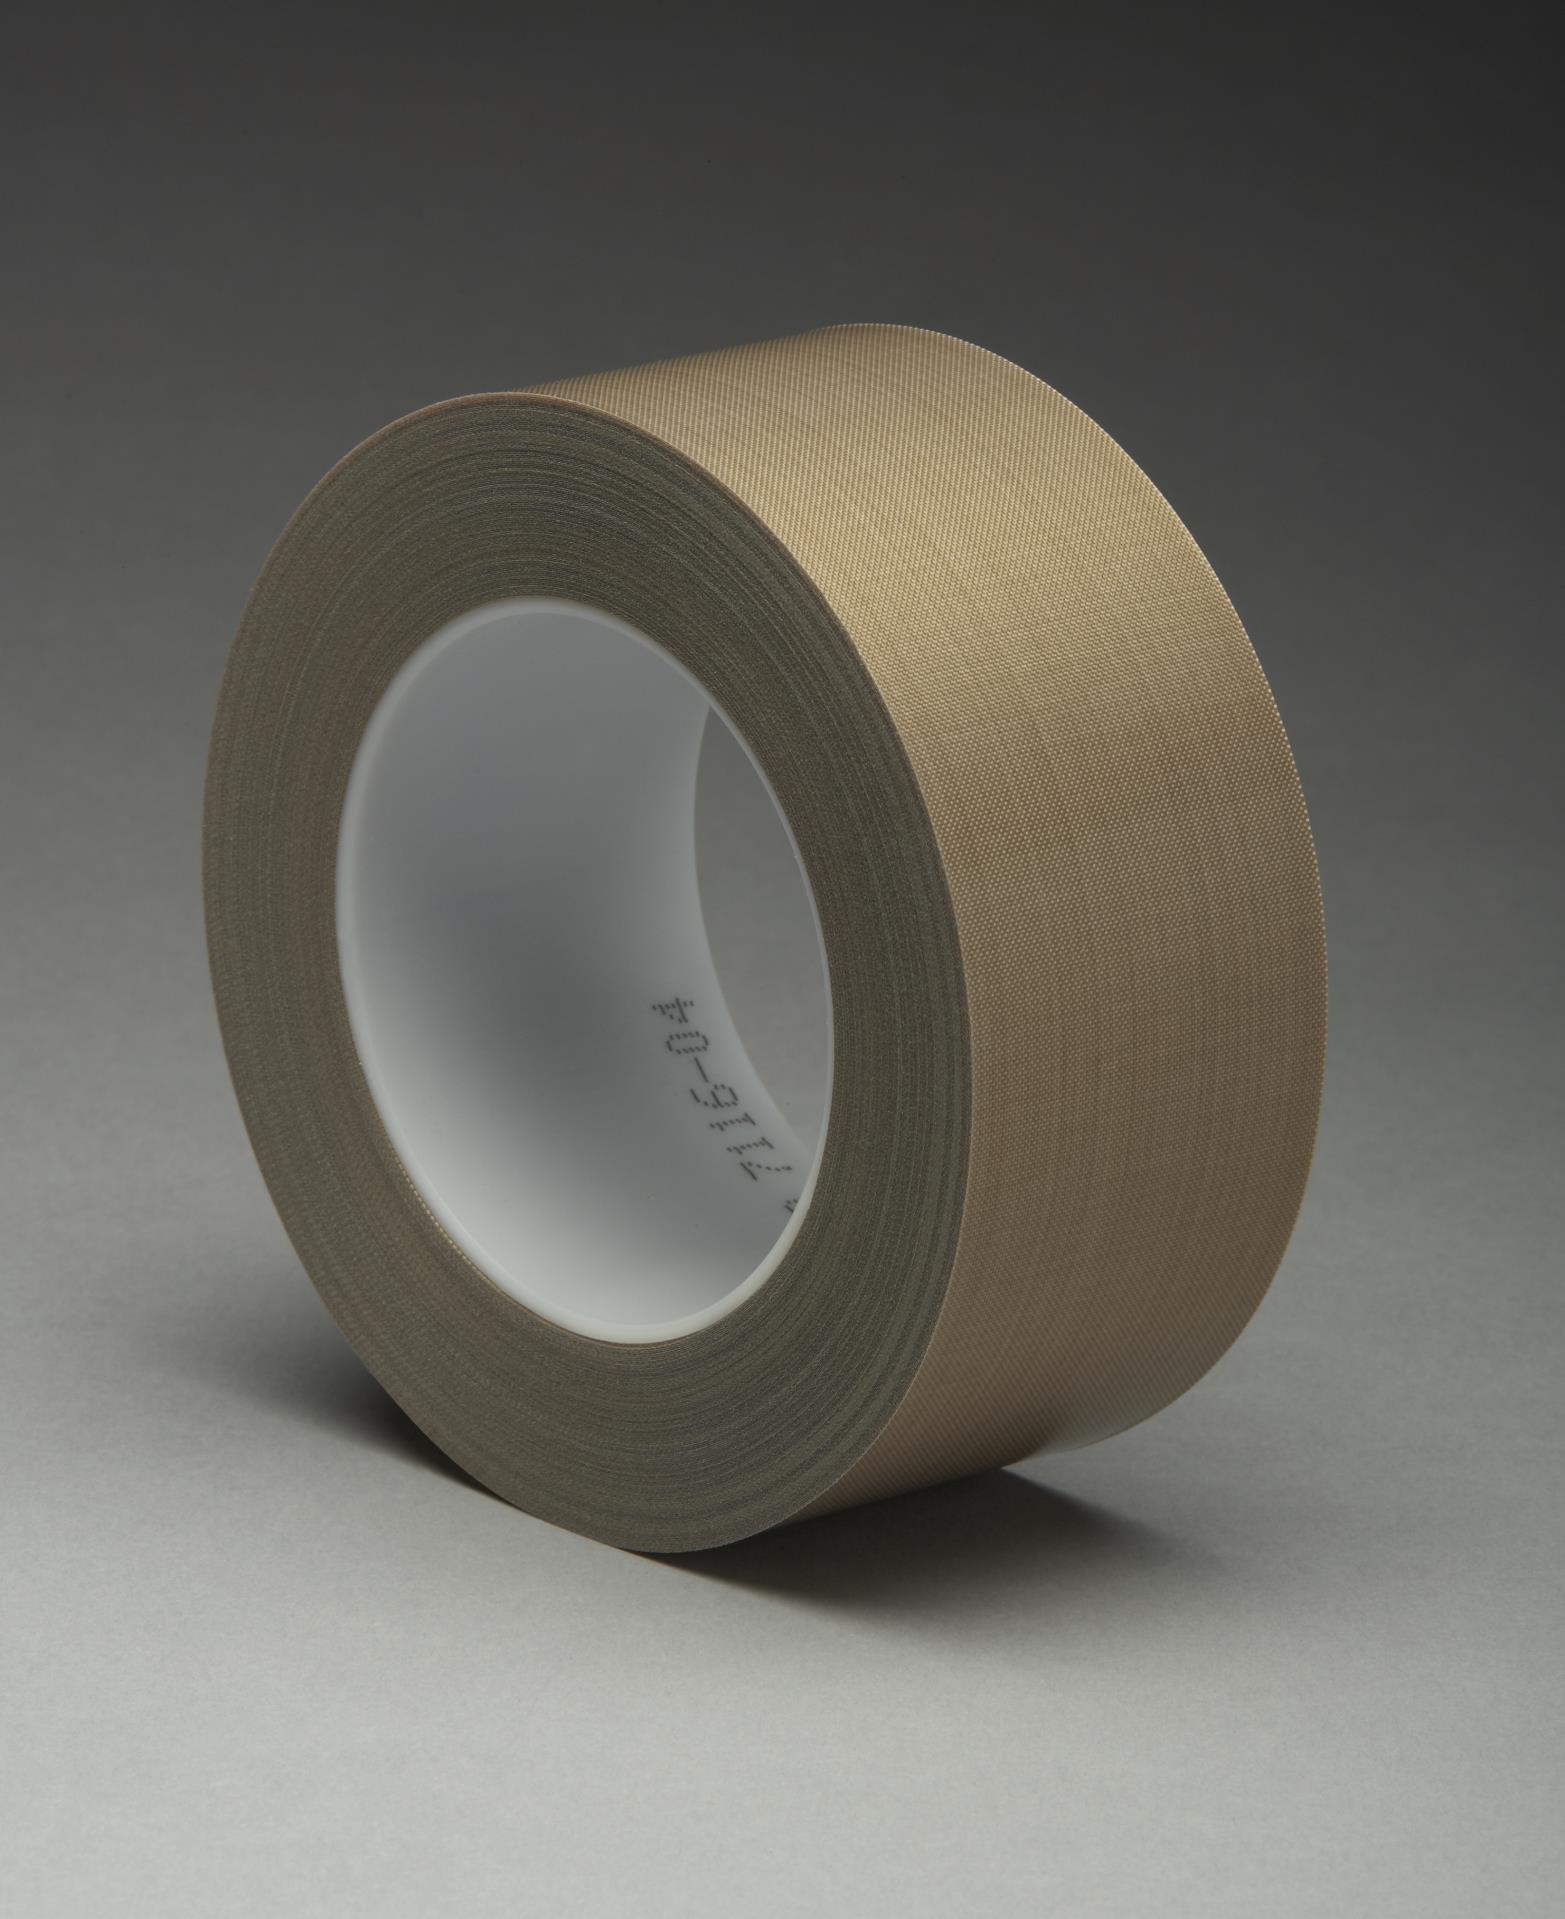 -65 degrees F to 450 degrees F Pack of 25 6 Length 4 Width 3M 361 4 x 6-25 White Glass Cloth/Silicone Adhesive Electrical Tape 6 Length 3M 361 4 x 6-25 Pack of 25 4 Width 